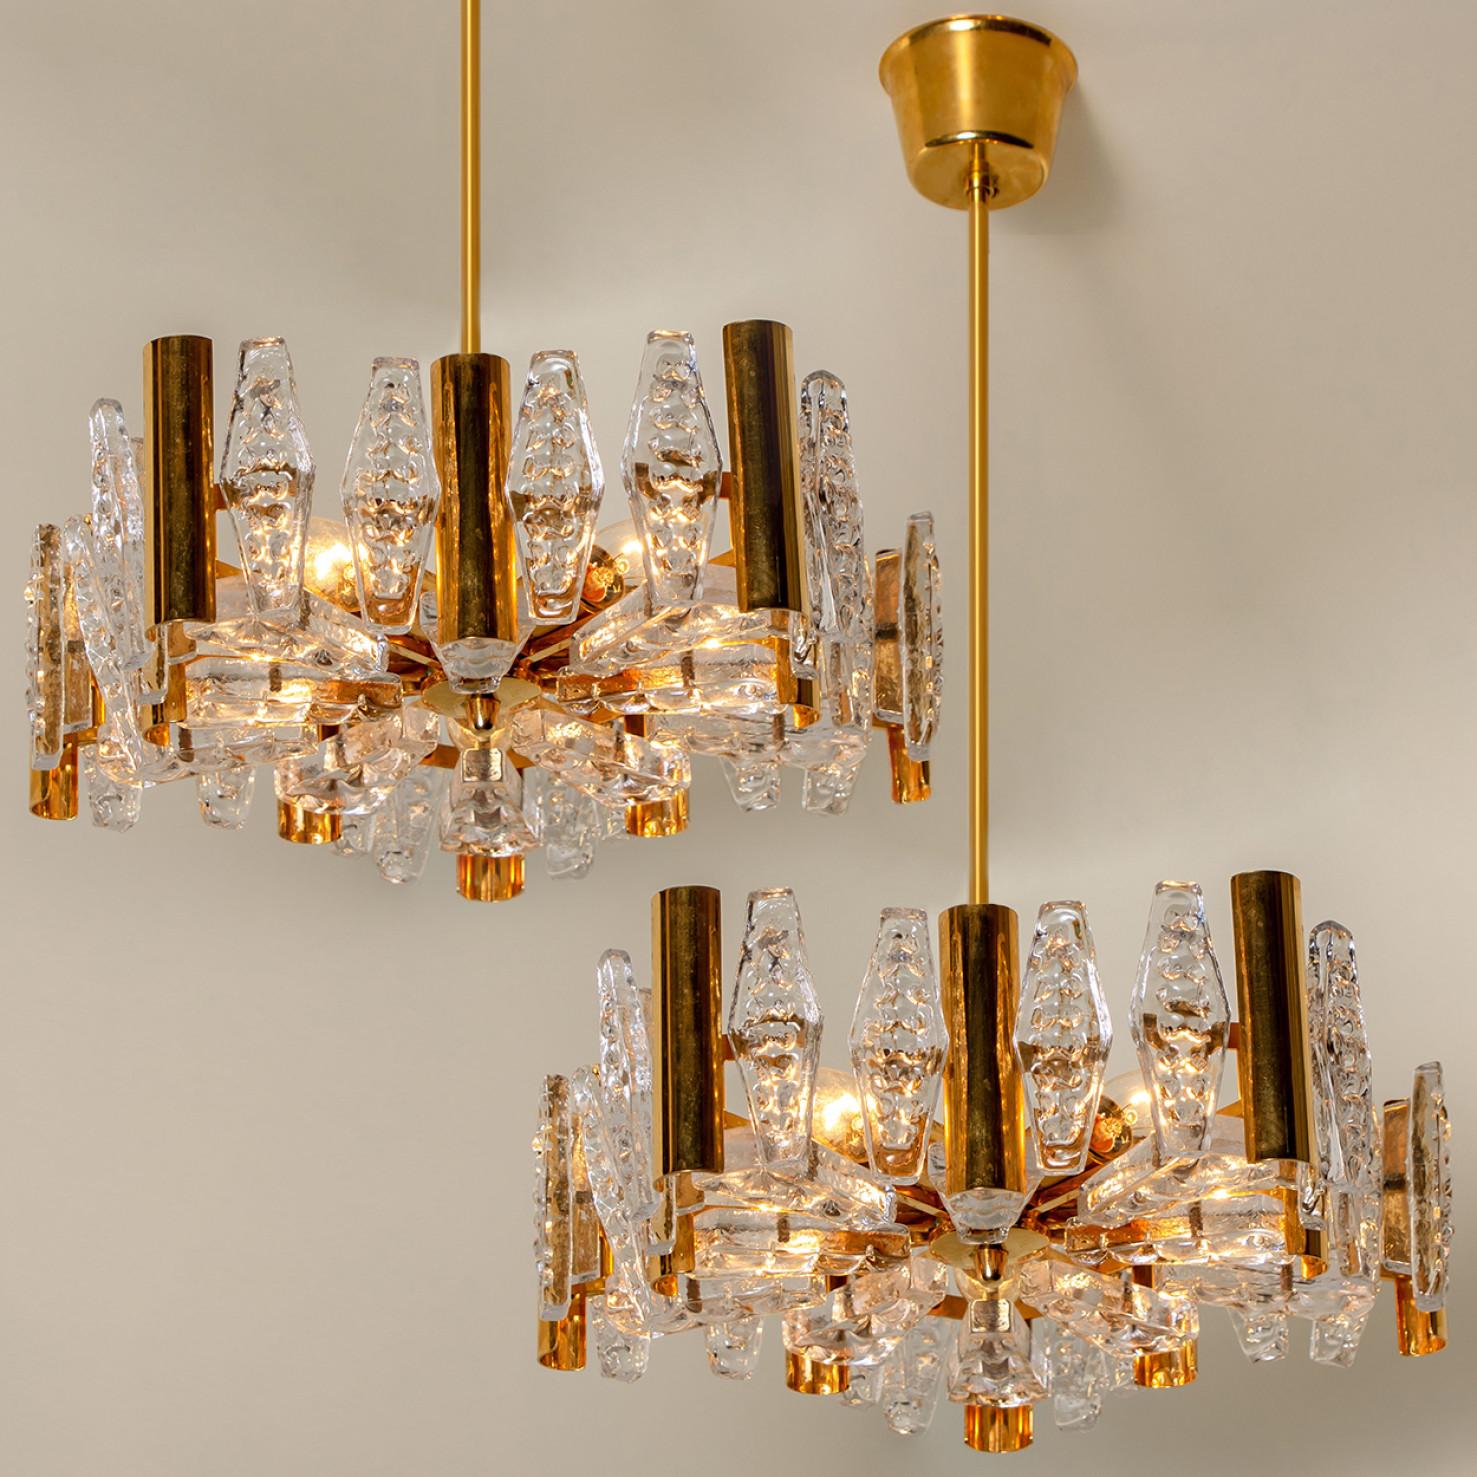 1 of the 2 Large Glass and Brass Chandelier by Orrefors, 1960s For Sale 1